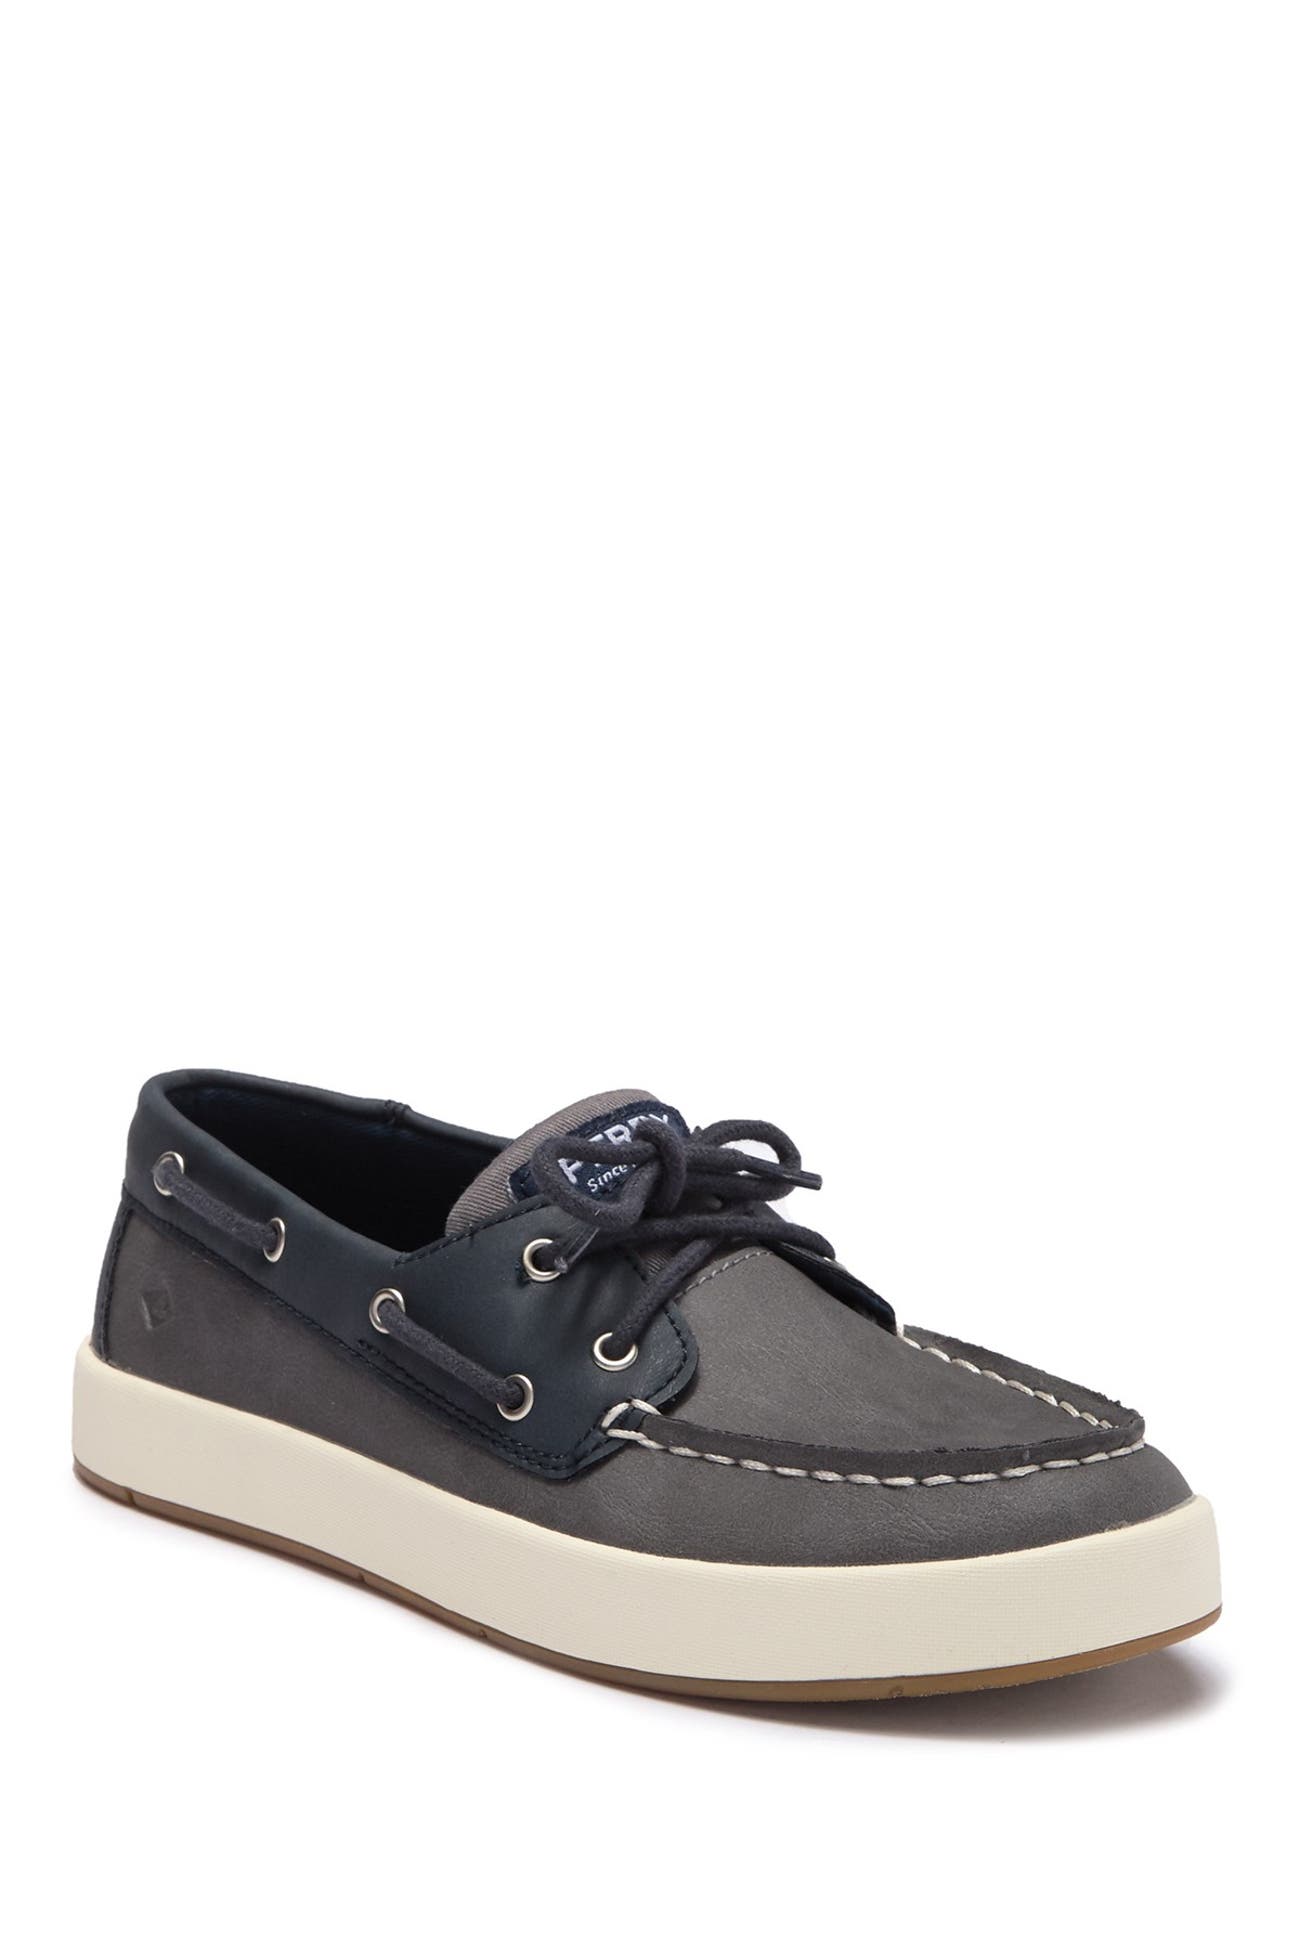 Sperry | Cruise Boat Shoe | Nordstrom Rack